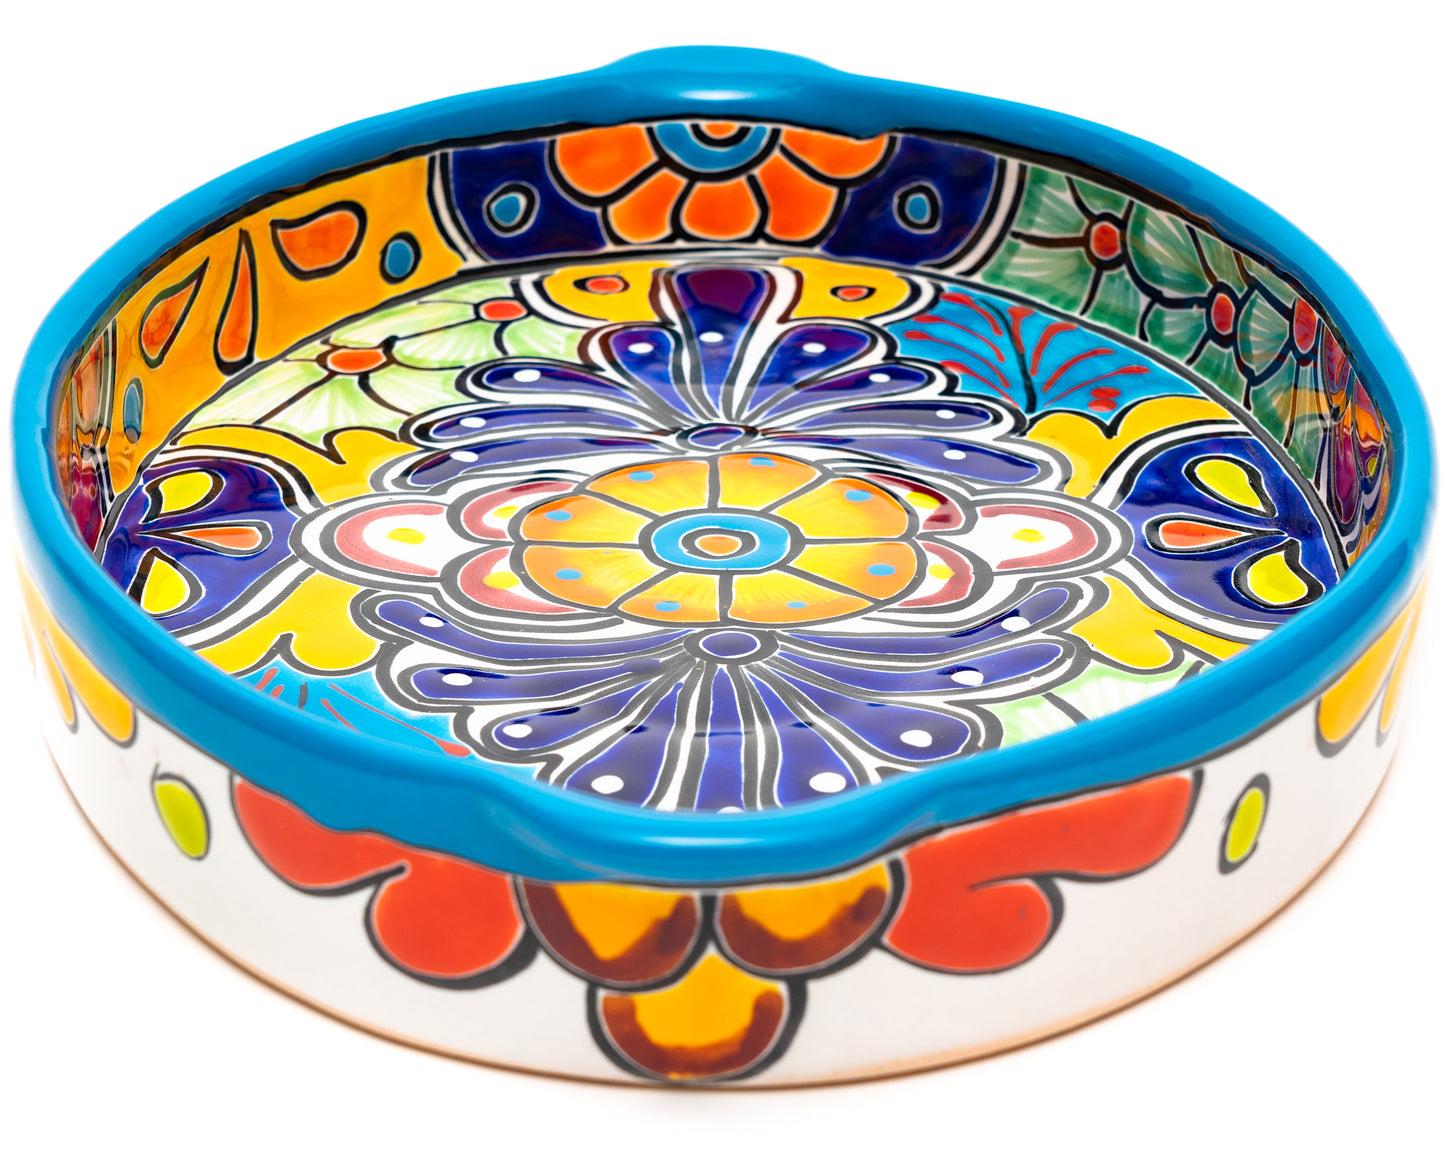 Oval Tray With Handles - Large - Turquoise